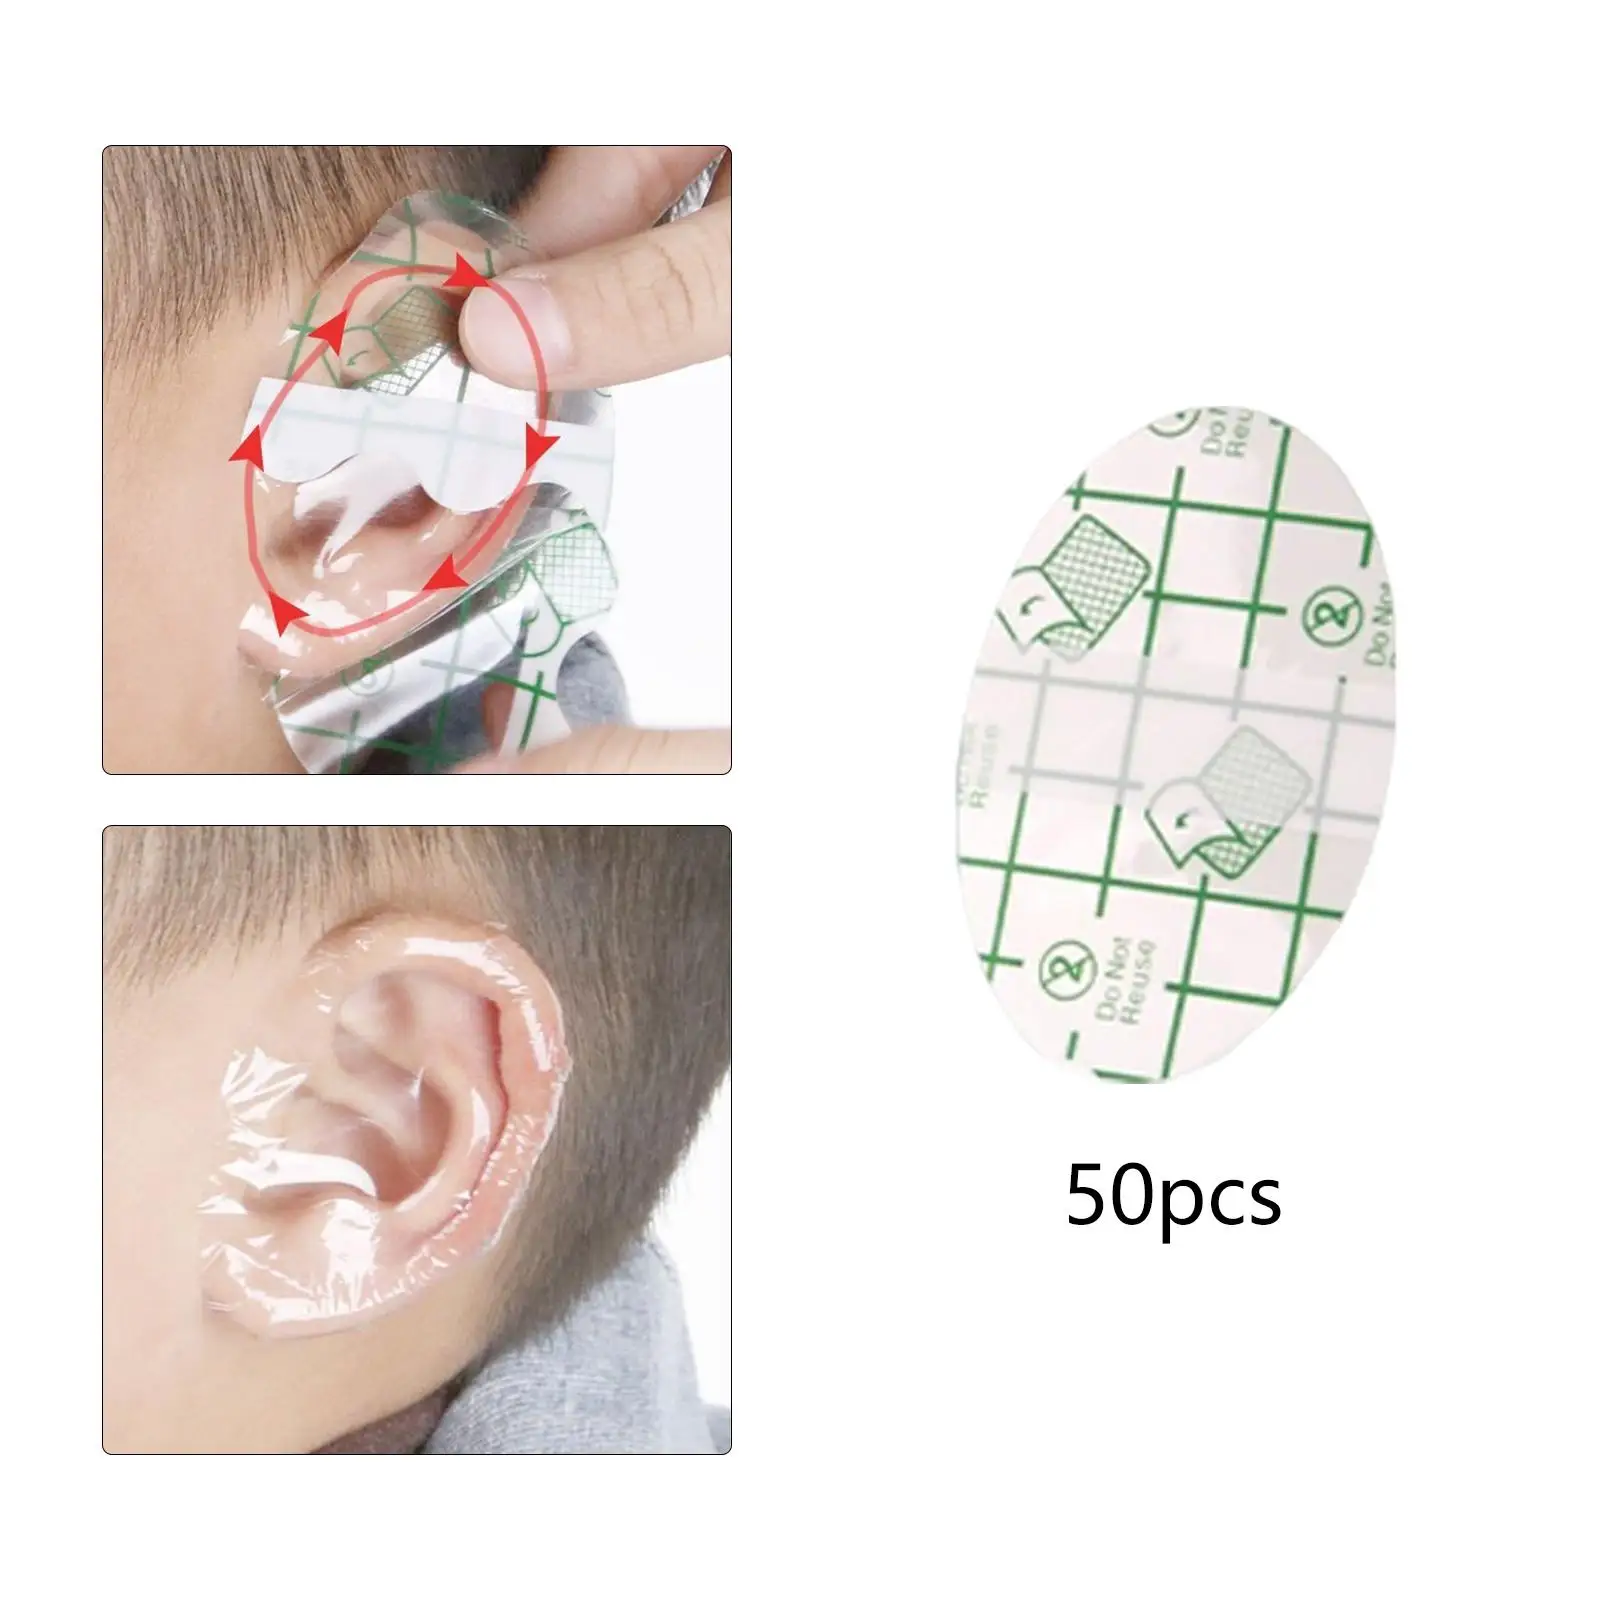 50 Pieces Baby Waterproof Ear Covers Disposable Professional Design Portable Ear Protection Covers for Shower Swimming Infants